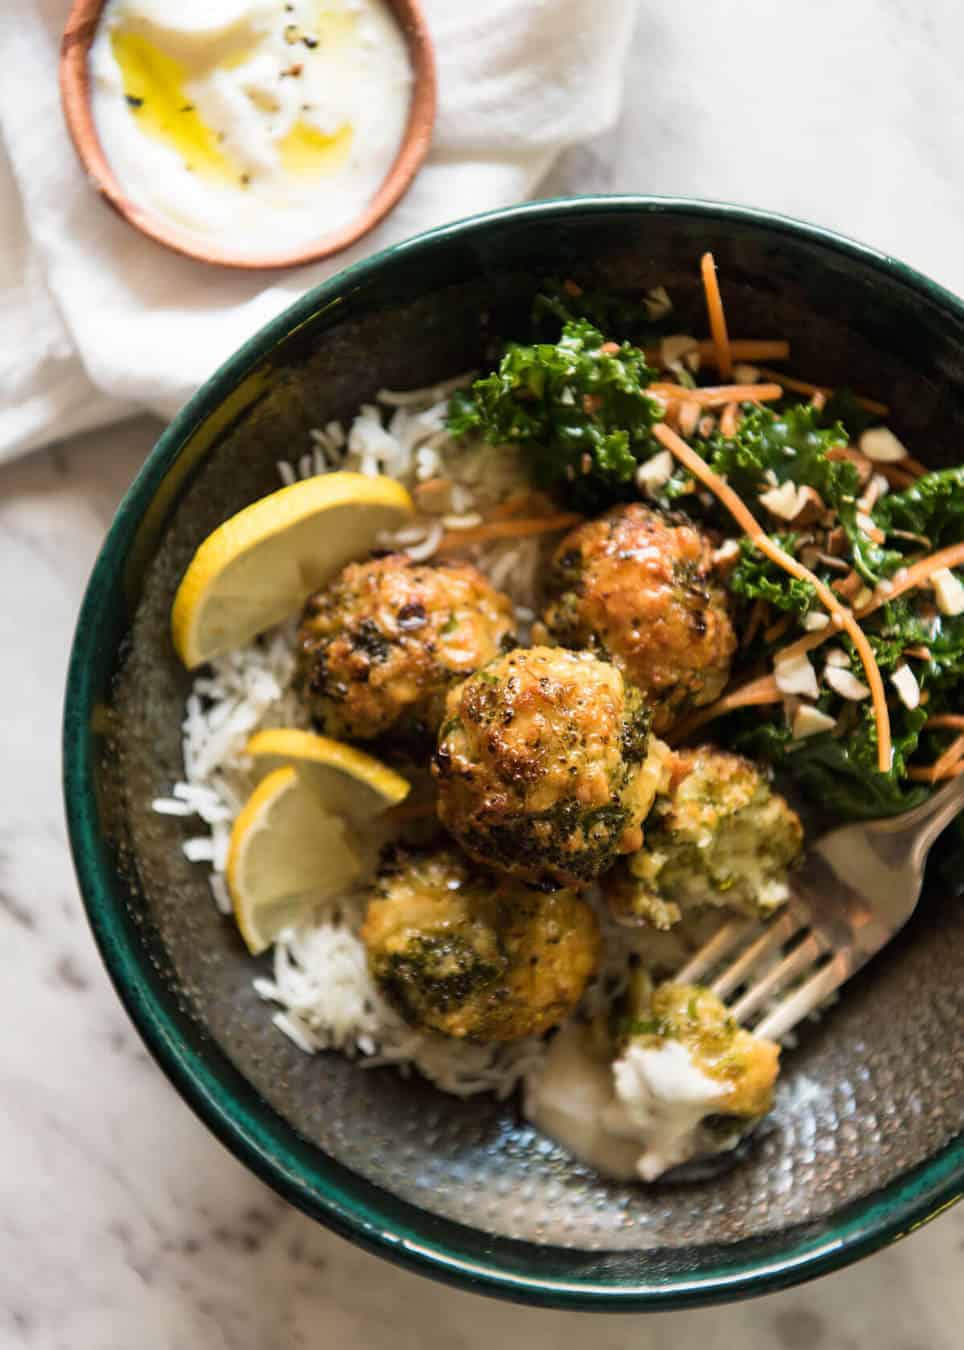 Baked Broccoli Cheese Balls - outrageously delicious as a meal or bites to serve at a gathering! Served with a Yoghurt Lemon Sauce. recipetineats.com